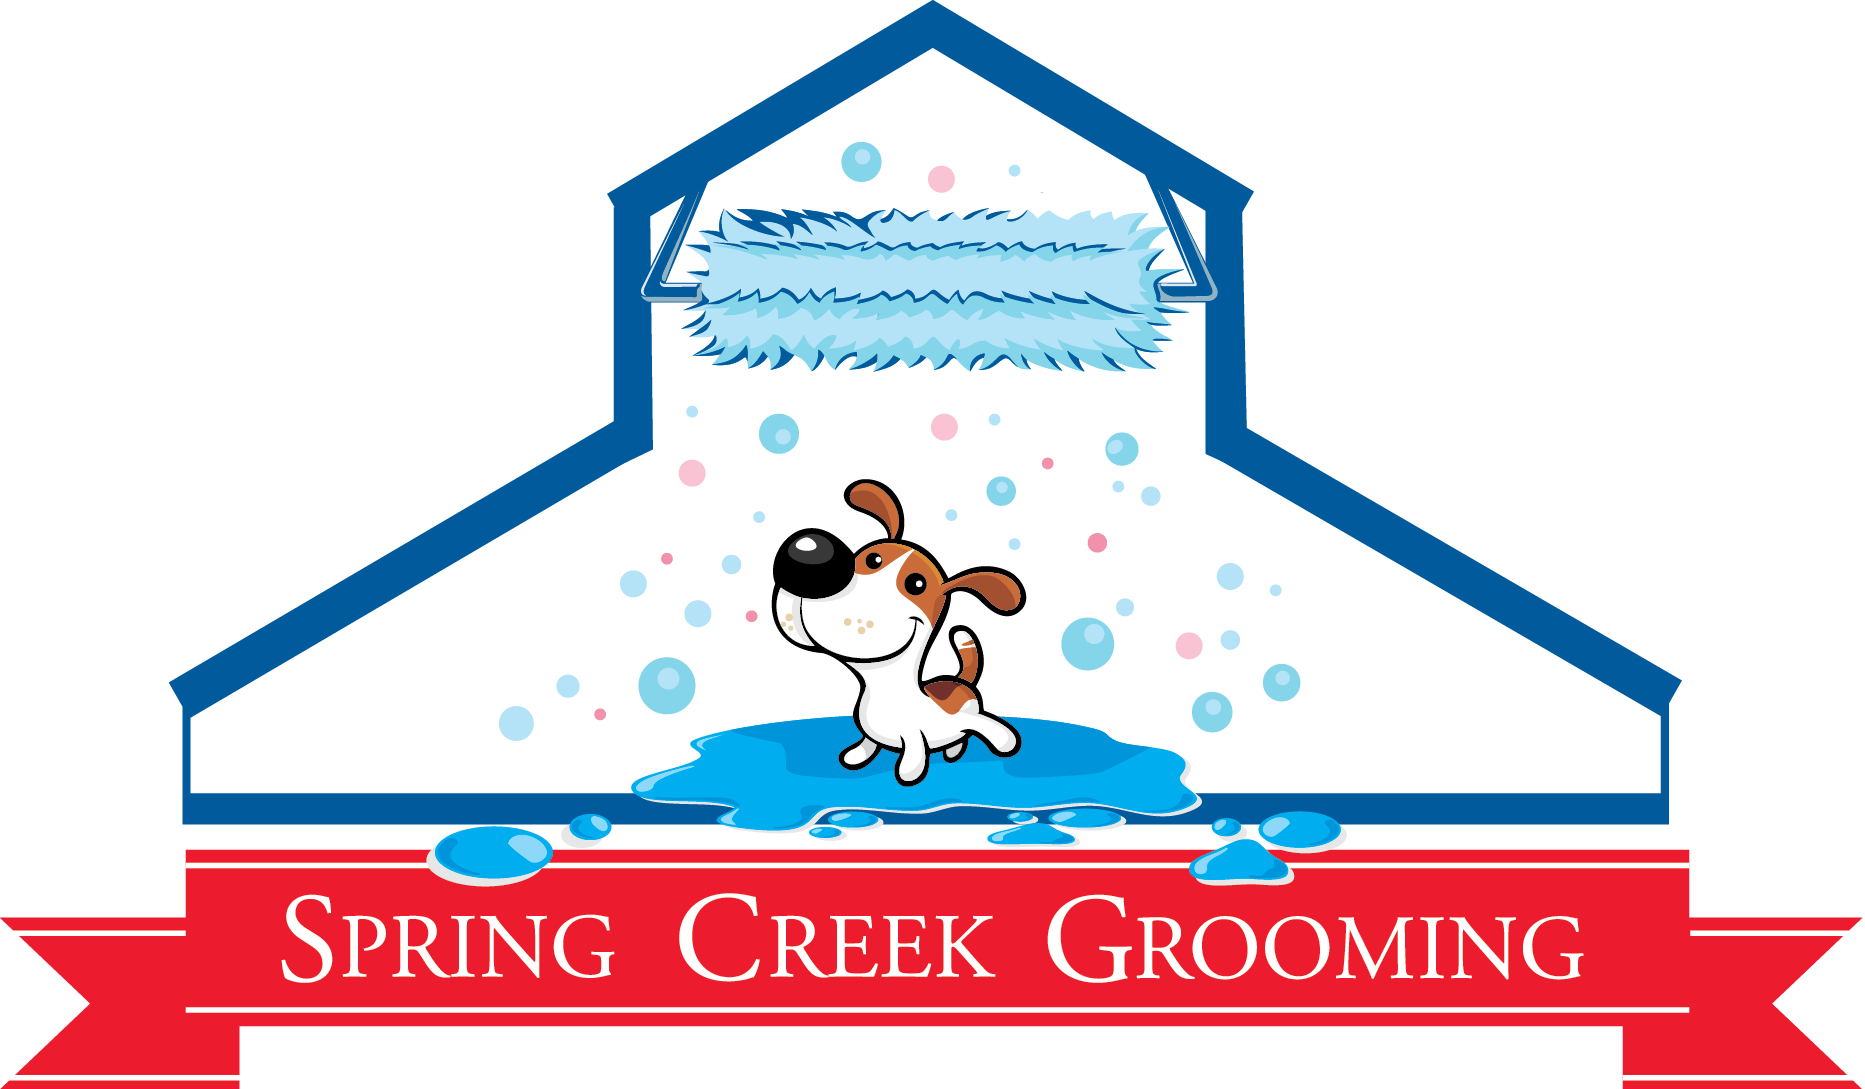 Spring Creek Grooming Is Pleased To Offer Pet Grooming - Oxford Feed And Lumber (1865x1089)